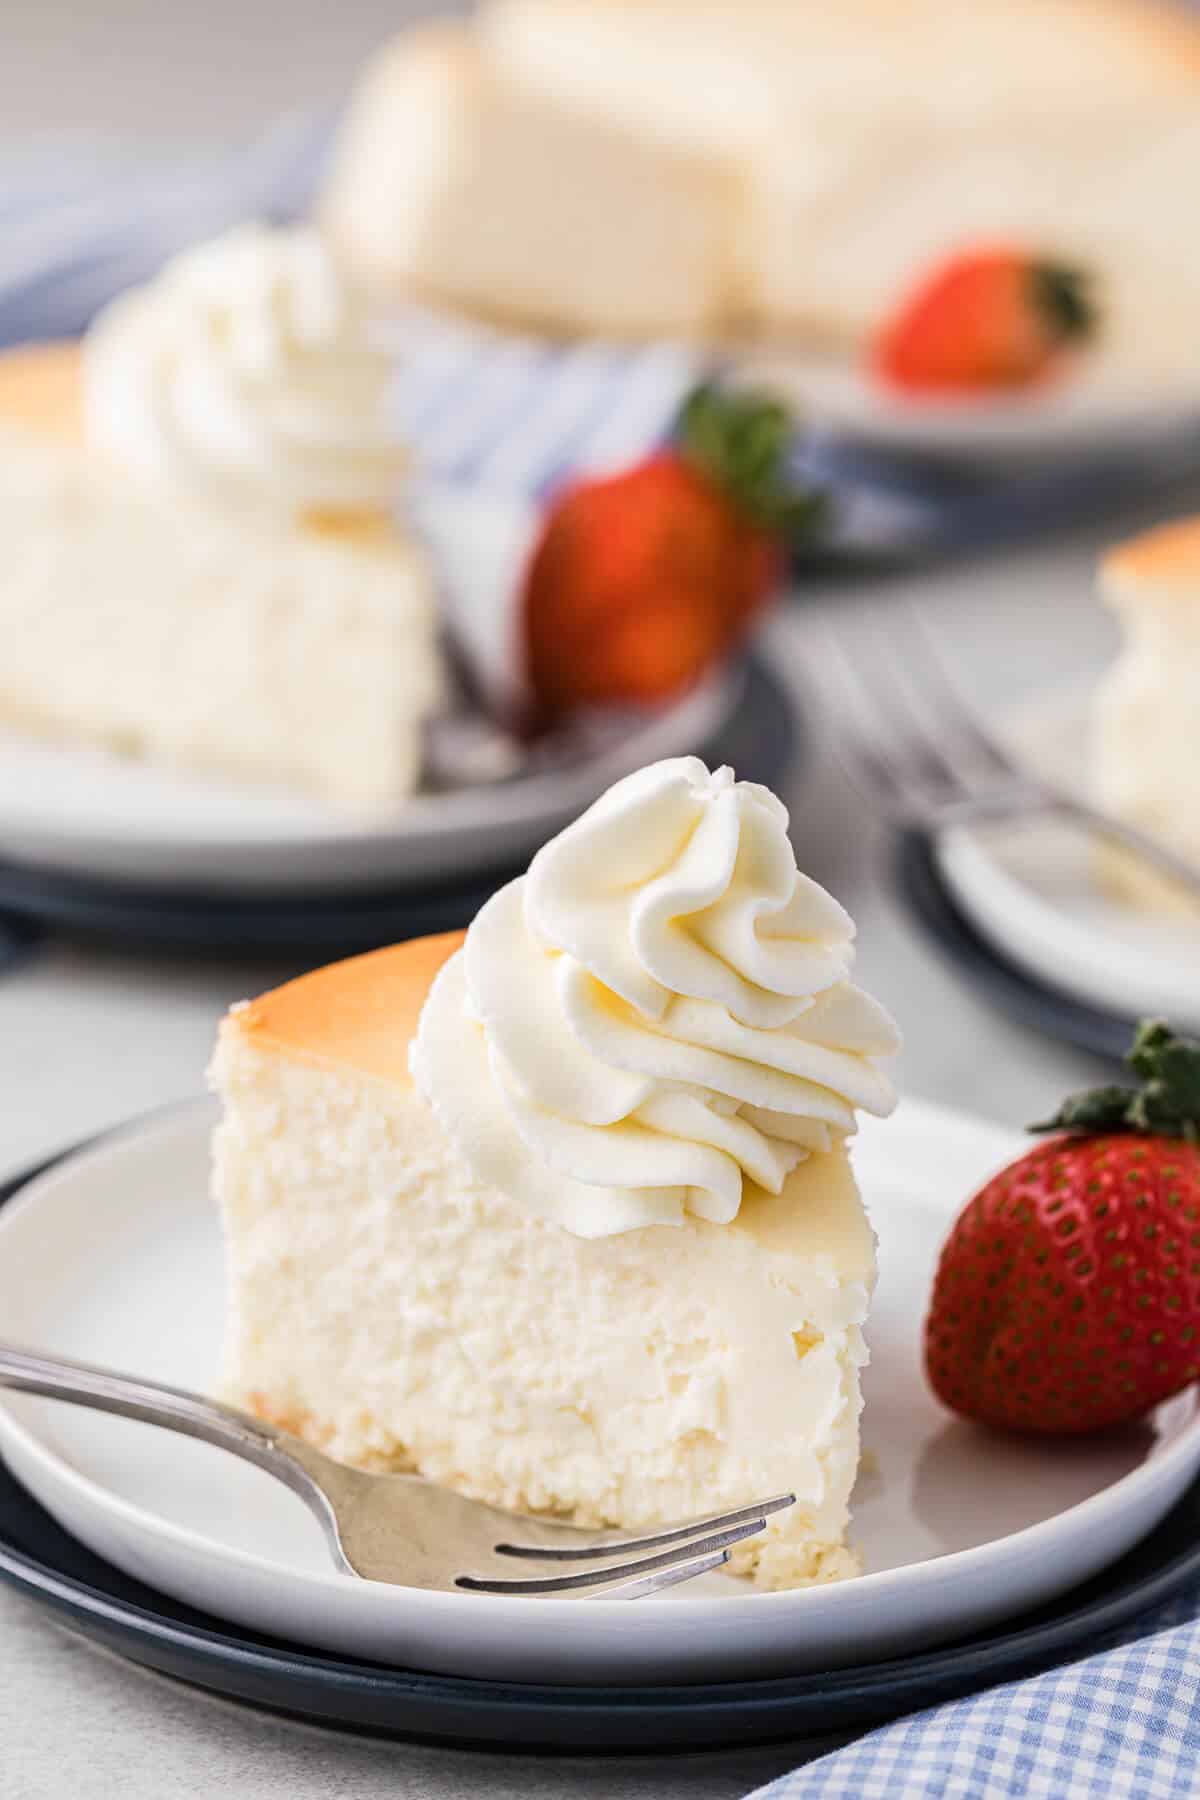 Stabilized whipped cream on top of a slice of cheesecake.